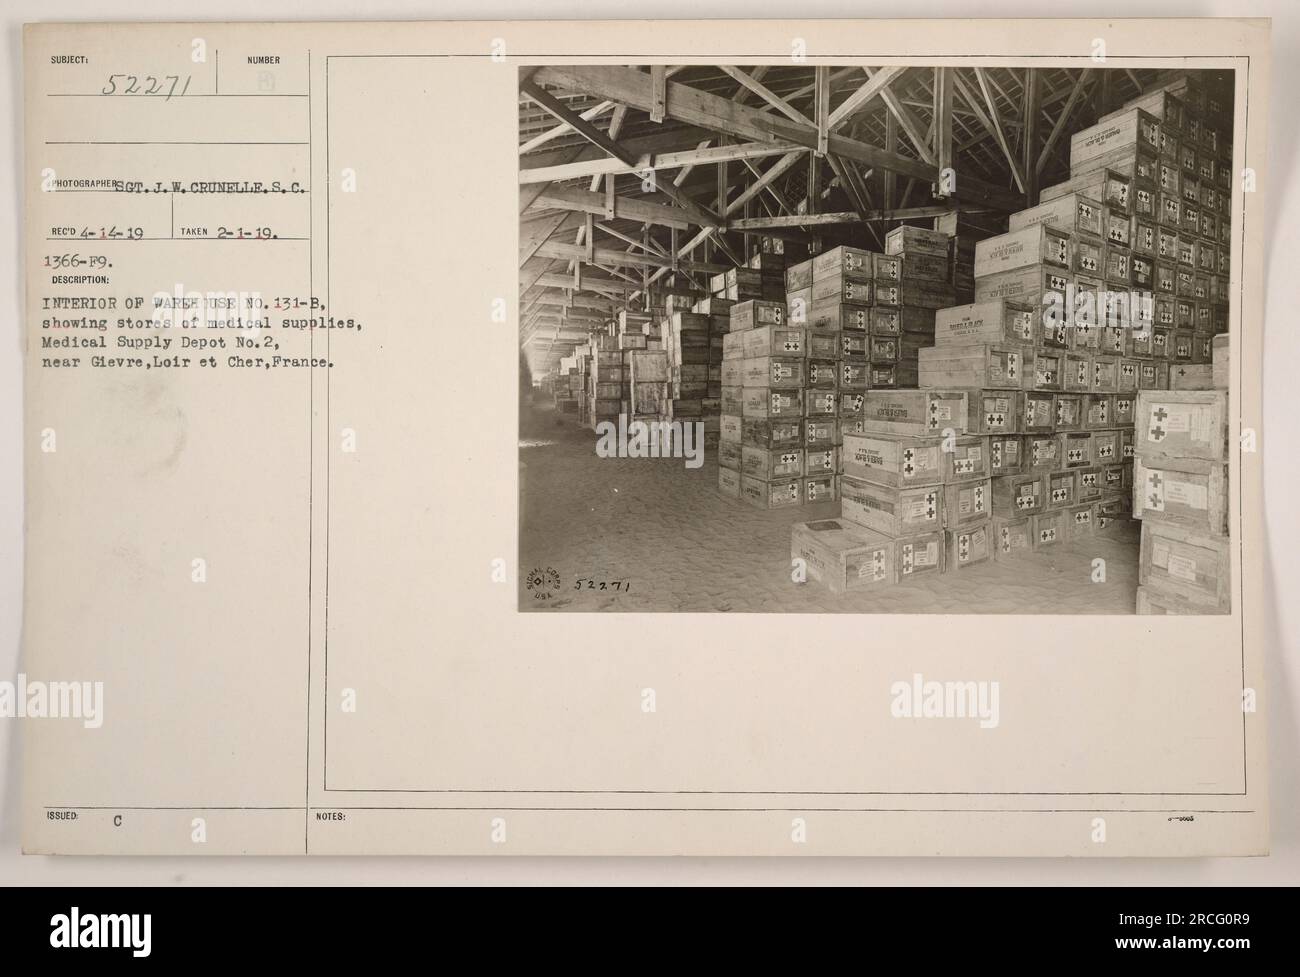 Caption: Interior view of Warehouse No. 131-B at Medical Supply Depot No. 2, located near Gievre, Loire et Cher, France. The photograph, taken on February 1, 1919, shows a substantial stock of medical supplies stored within the warehouse. This image is one of the numerous records from the Photographs of American Military Activities during World War One collection, captured by J. W. Crunelle. Stock Photo